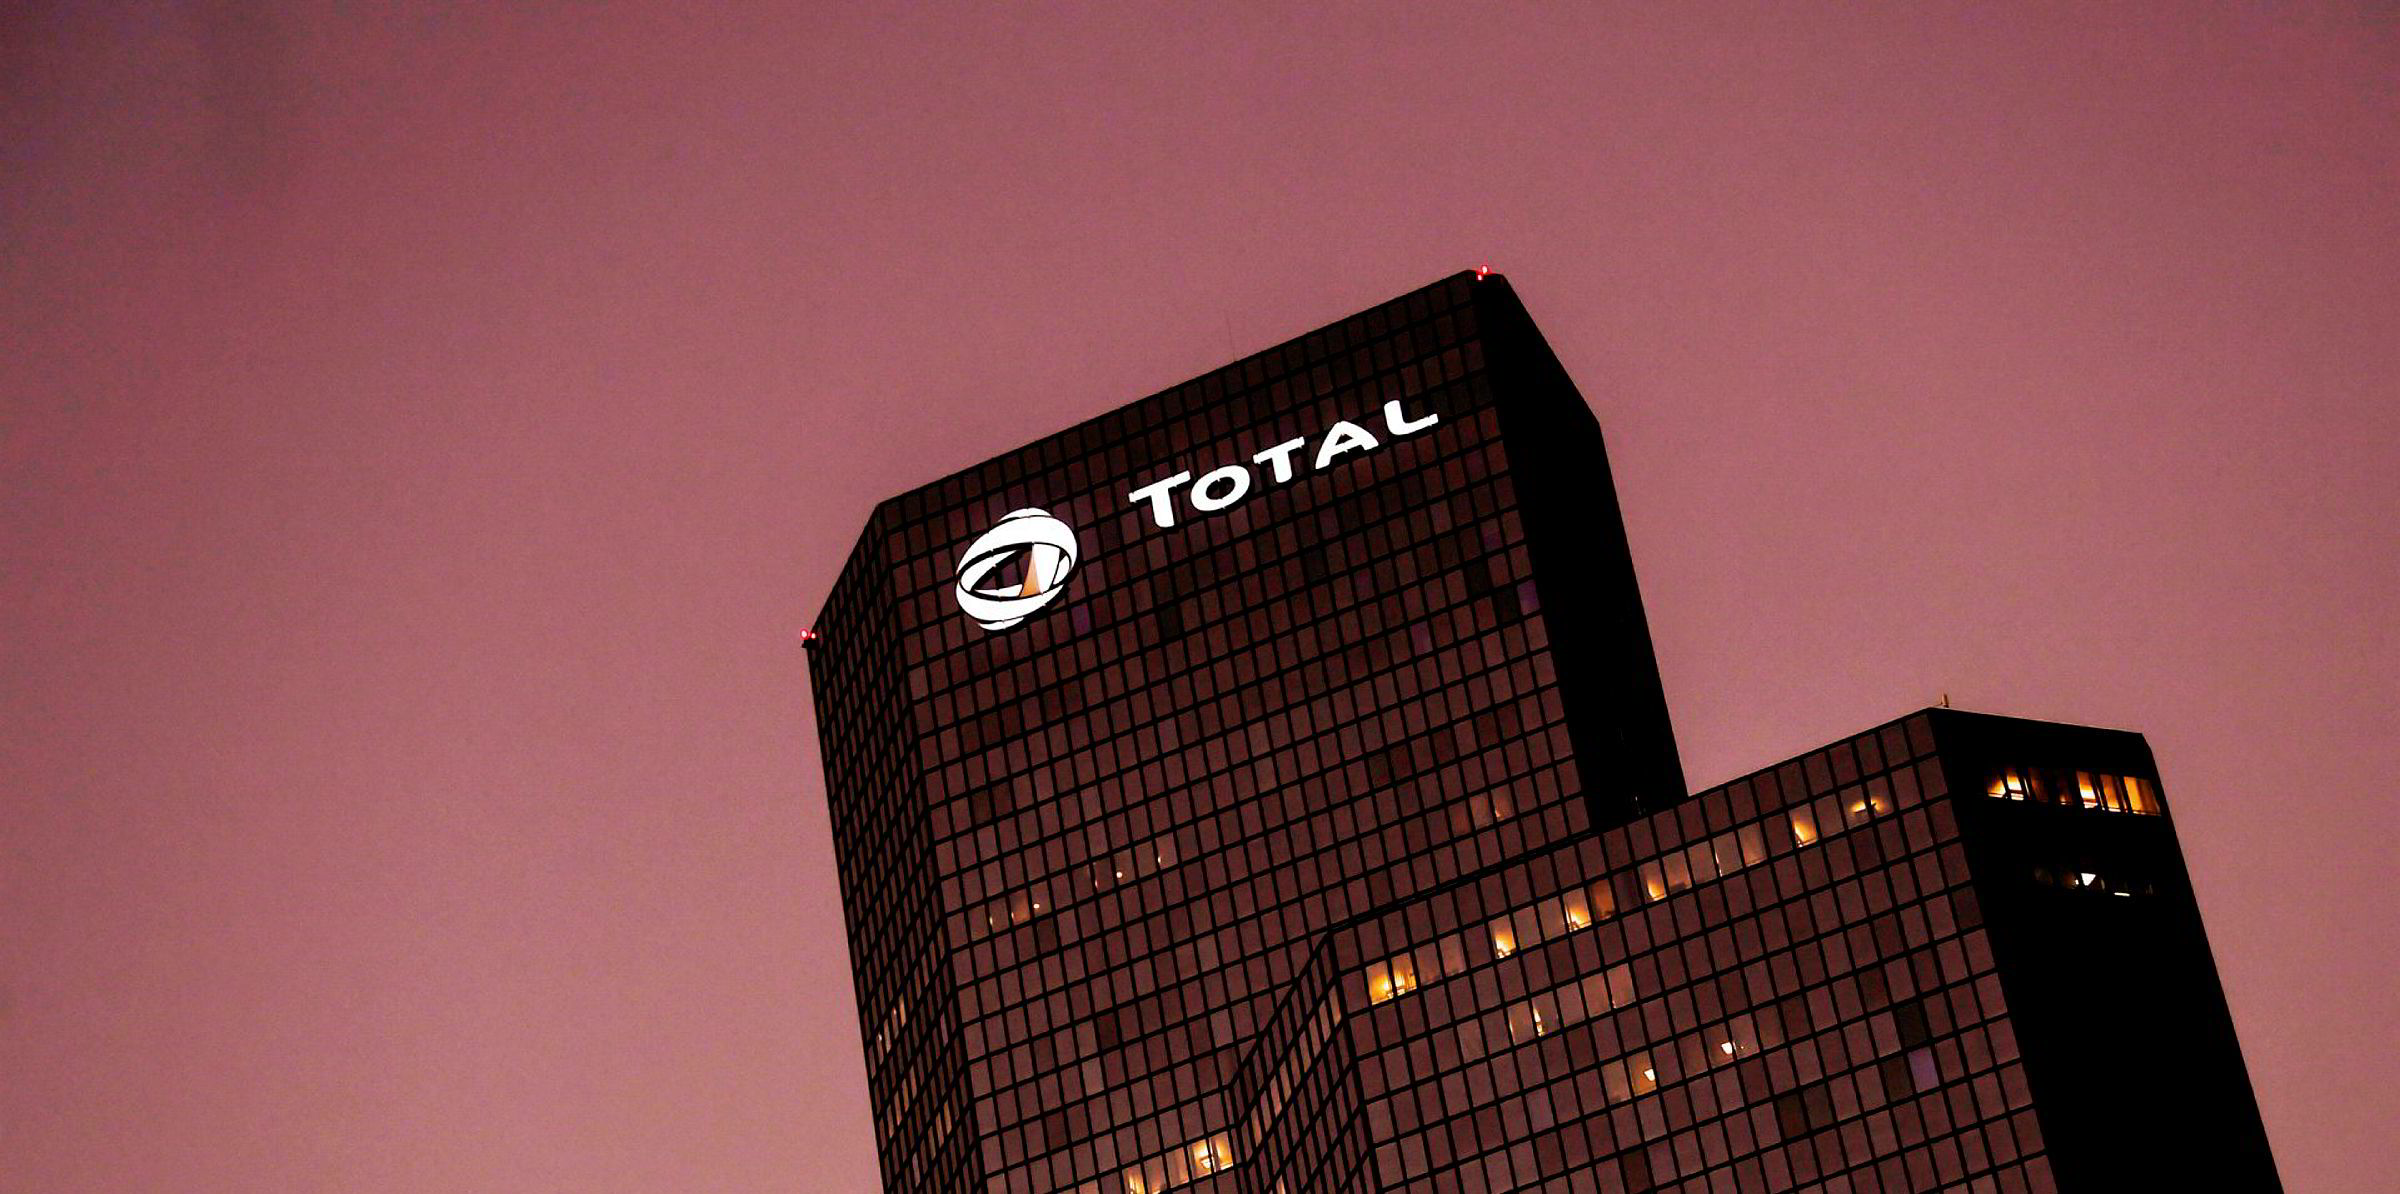 Oil giant Total to build France's largest battery in latest power play |  Recharge